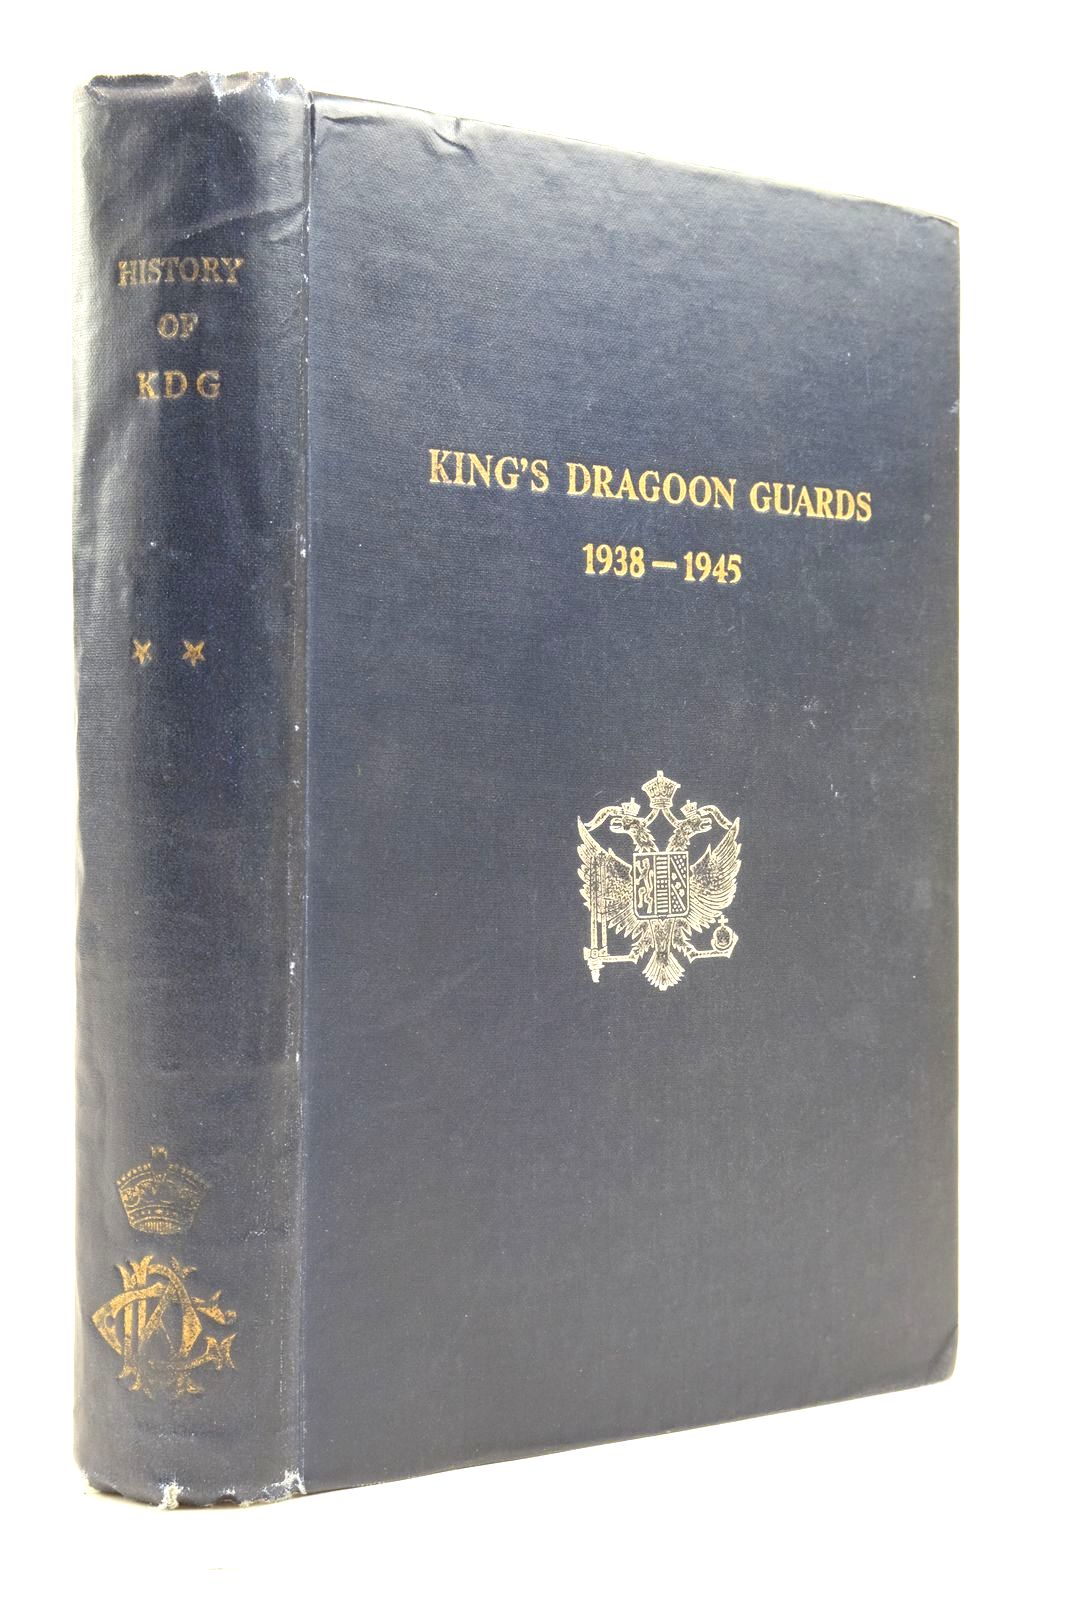 Photo of HISTORY OF THE KING'S DRAGOON GUARD 1938-1945 written by McCorquodale, D. Hutchings, B.L.B. Woozley, A.D. McCreery, Richard L. (STOCK CODE: 2137547)  for sale by Stella & Rose's Books